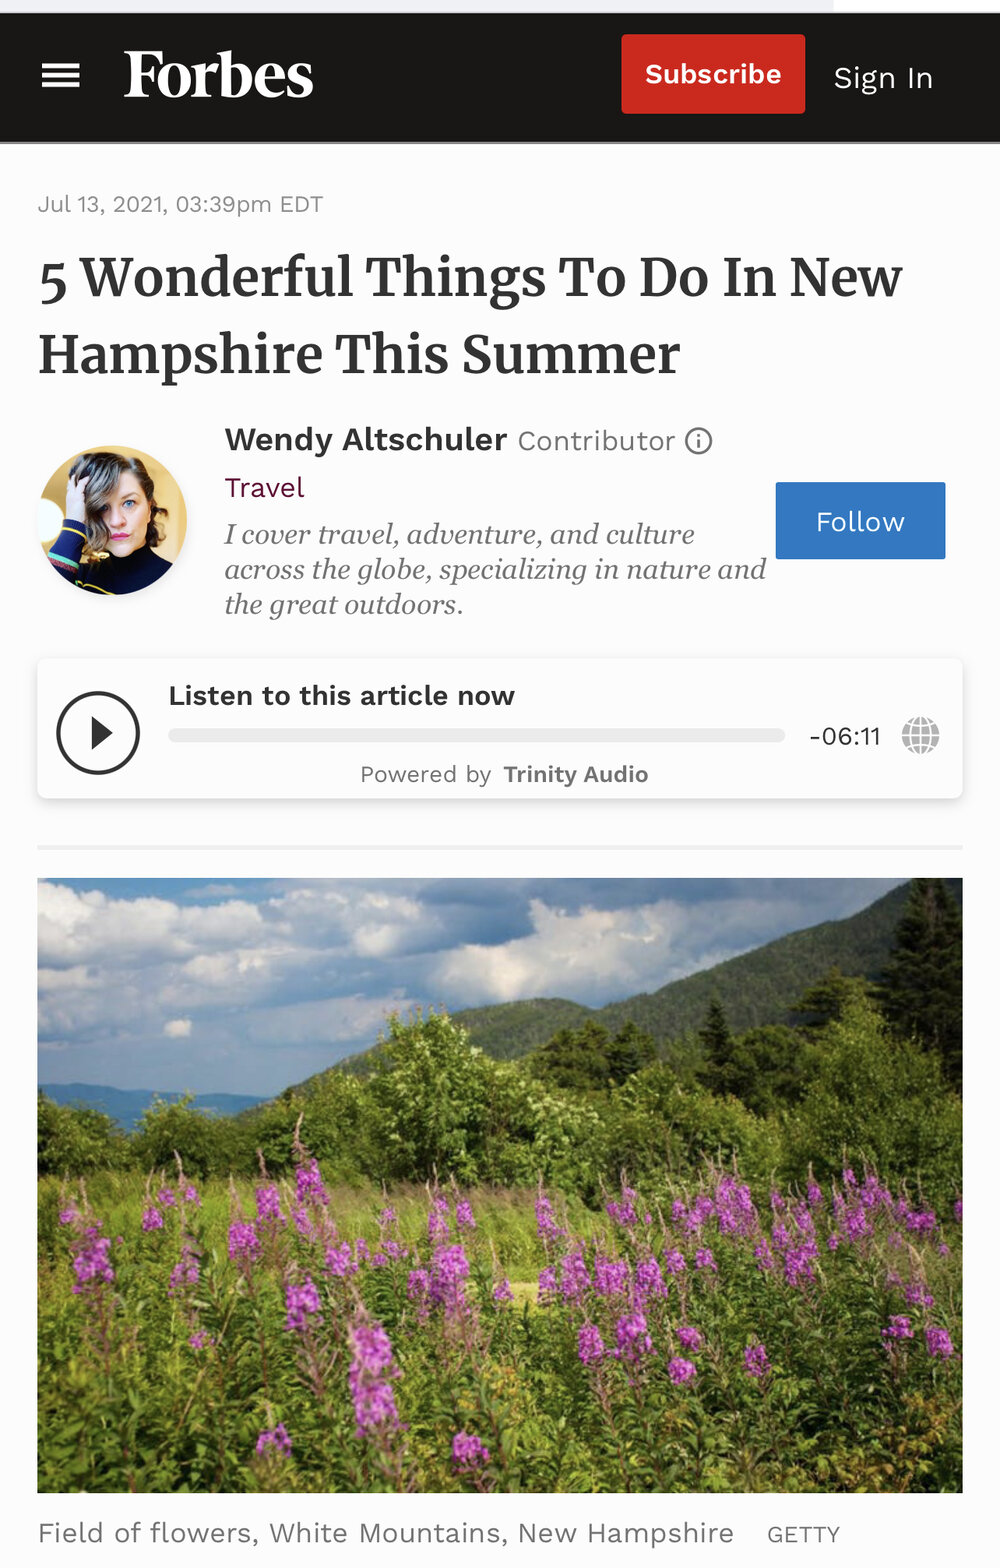 5 Wonderful Things To Do In New Hampshire This Summer